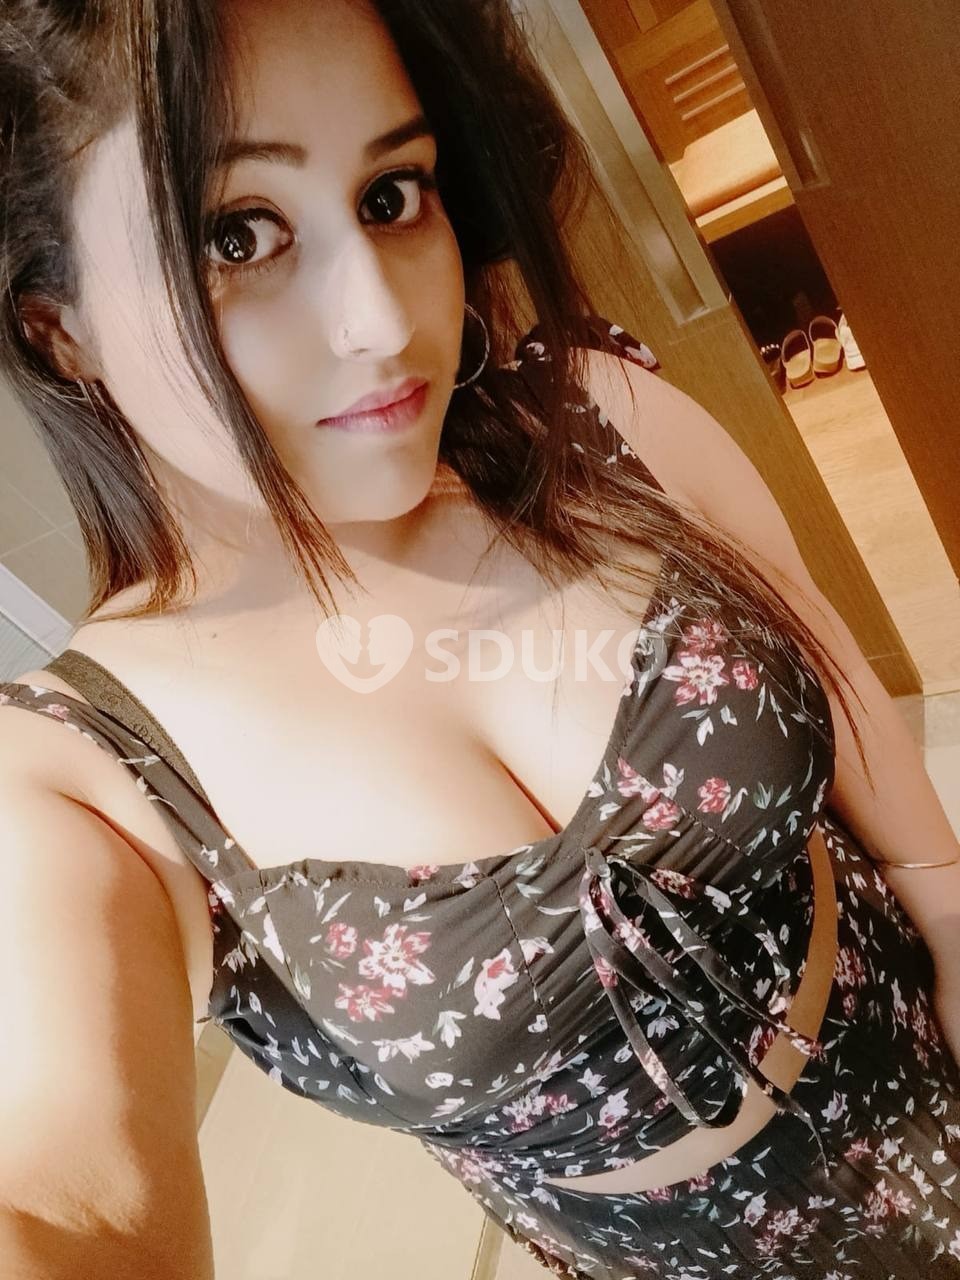 DELHI 😍......AND HOTEL SERVICE AVAILABLE FULL SAFE AND SECURE SERVICE AVAILABLE MEERA